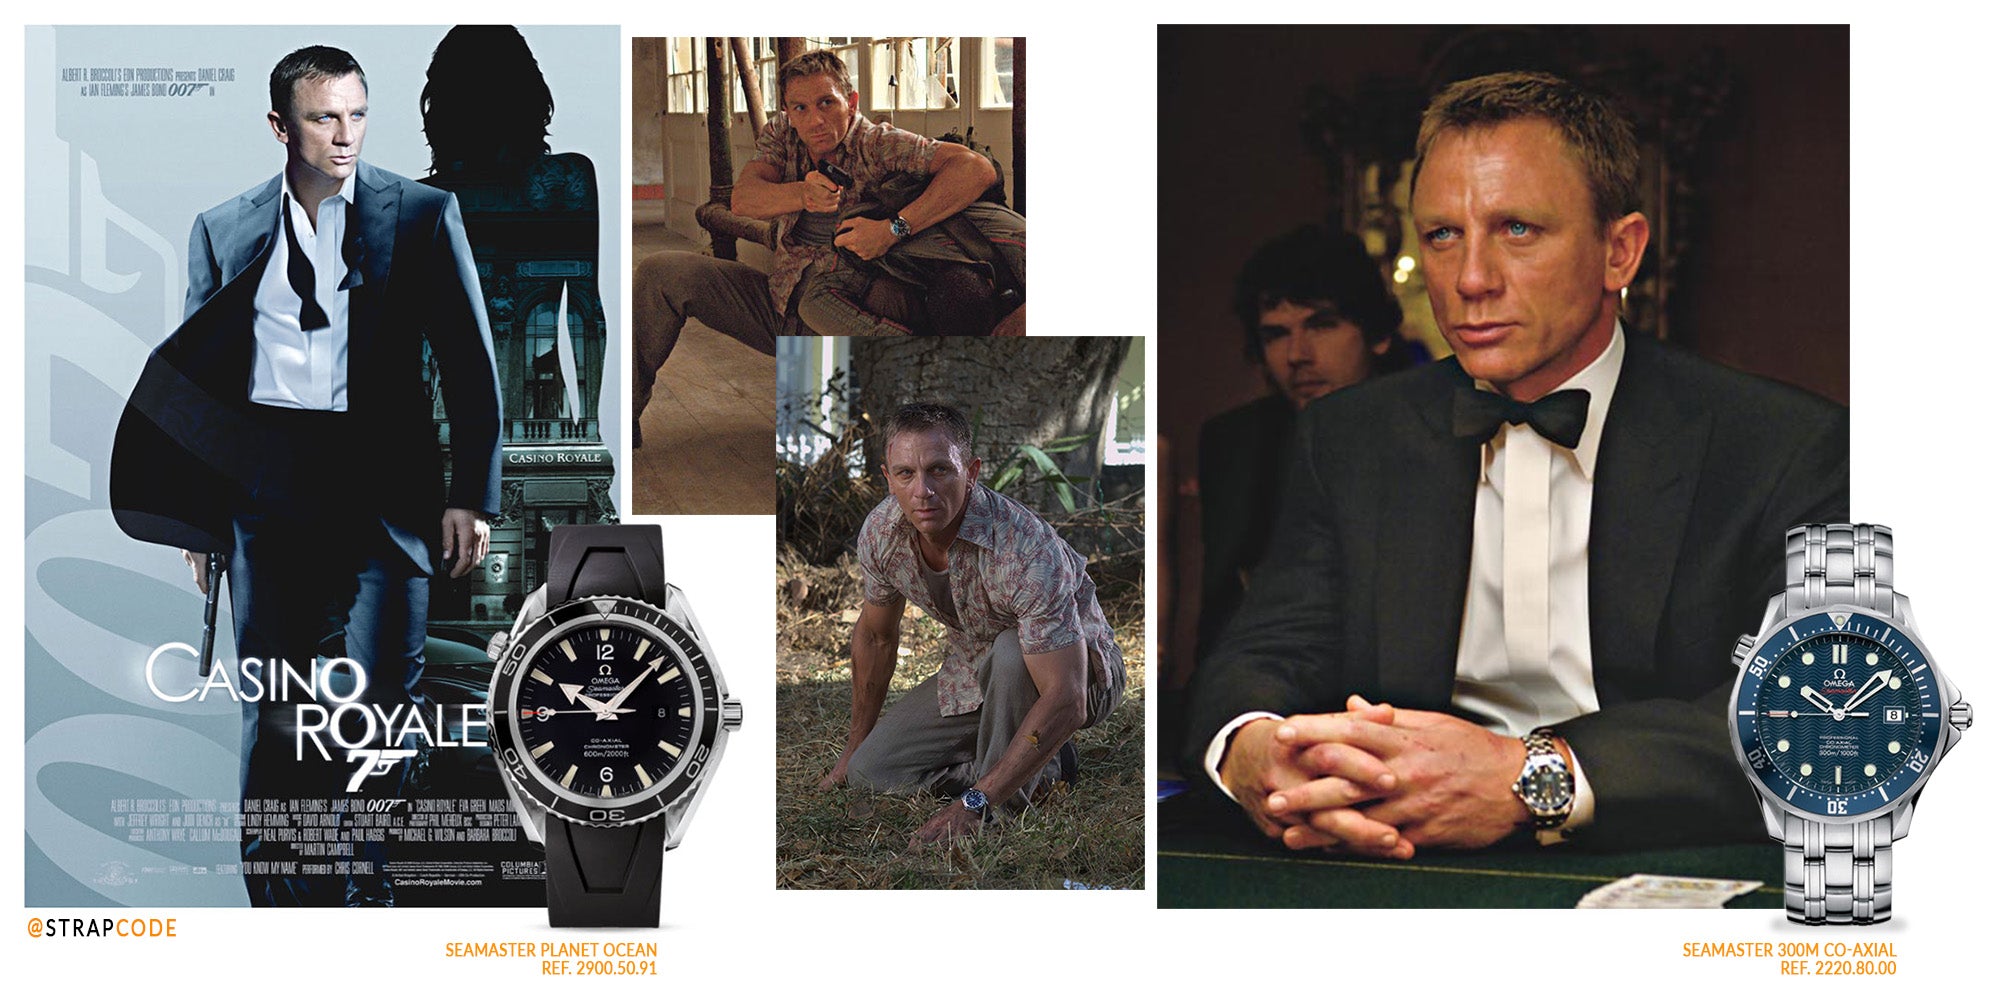 Omega Seamaster 300M Co-Axial Ref. 2220.80.00 and the Omega Seamaster Planet Ocean Ref. 2900.50.91 in Casino Royale(2006)